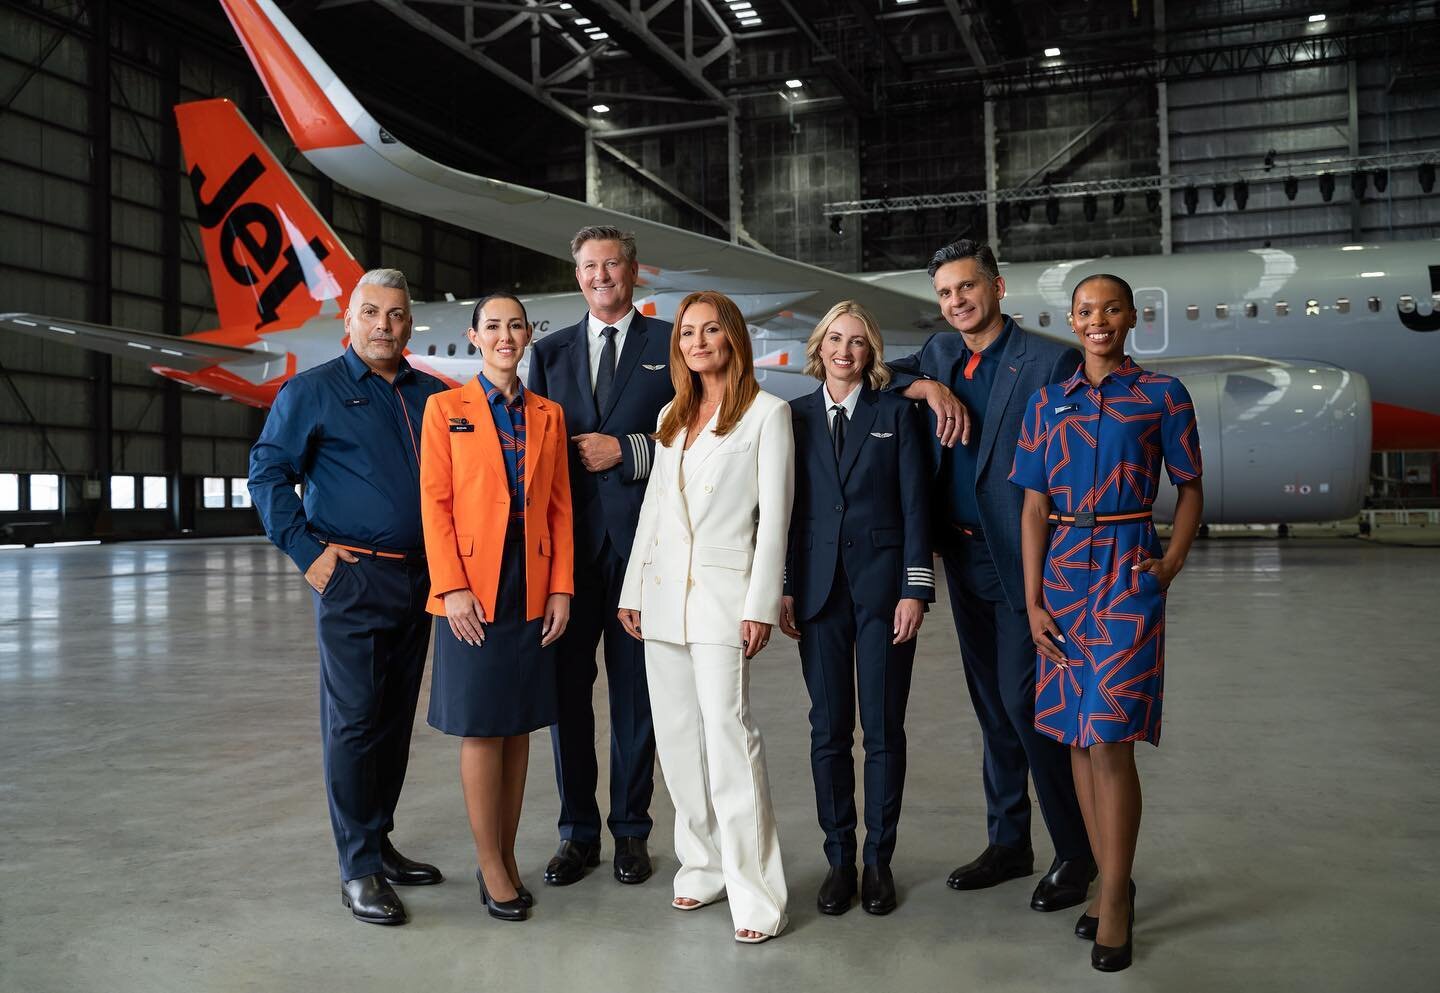 Jet-setting into the sunset with @jetstaraustralia in this stylish new look! 

Such fun last week working with the gorgeous crew and designer Genevieve @gingerandsmart, to capture these fabulous new uniforms